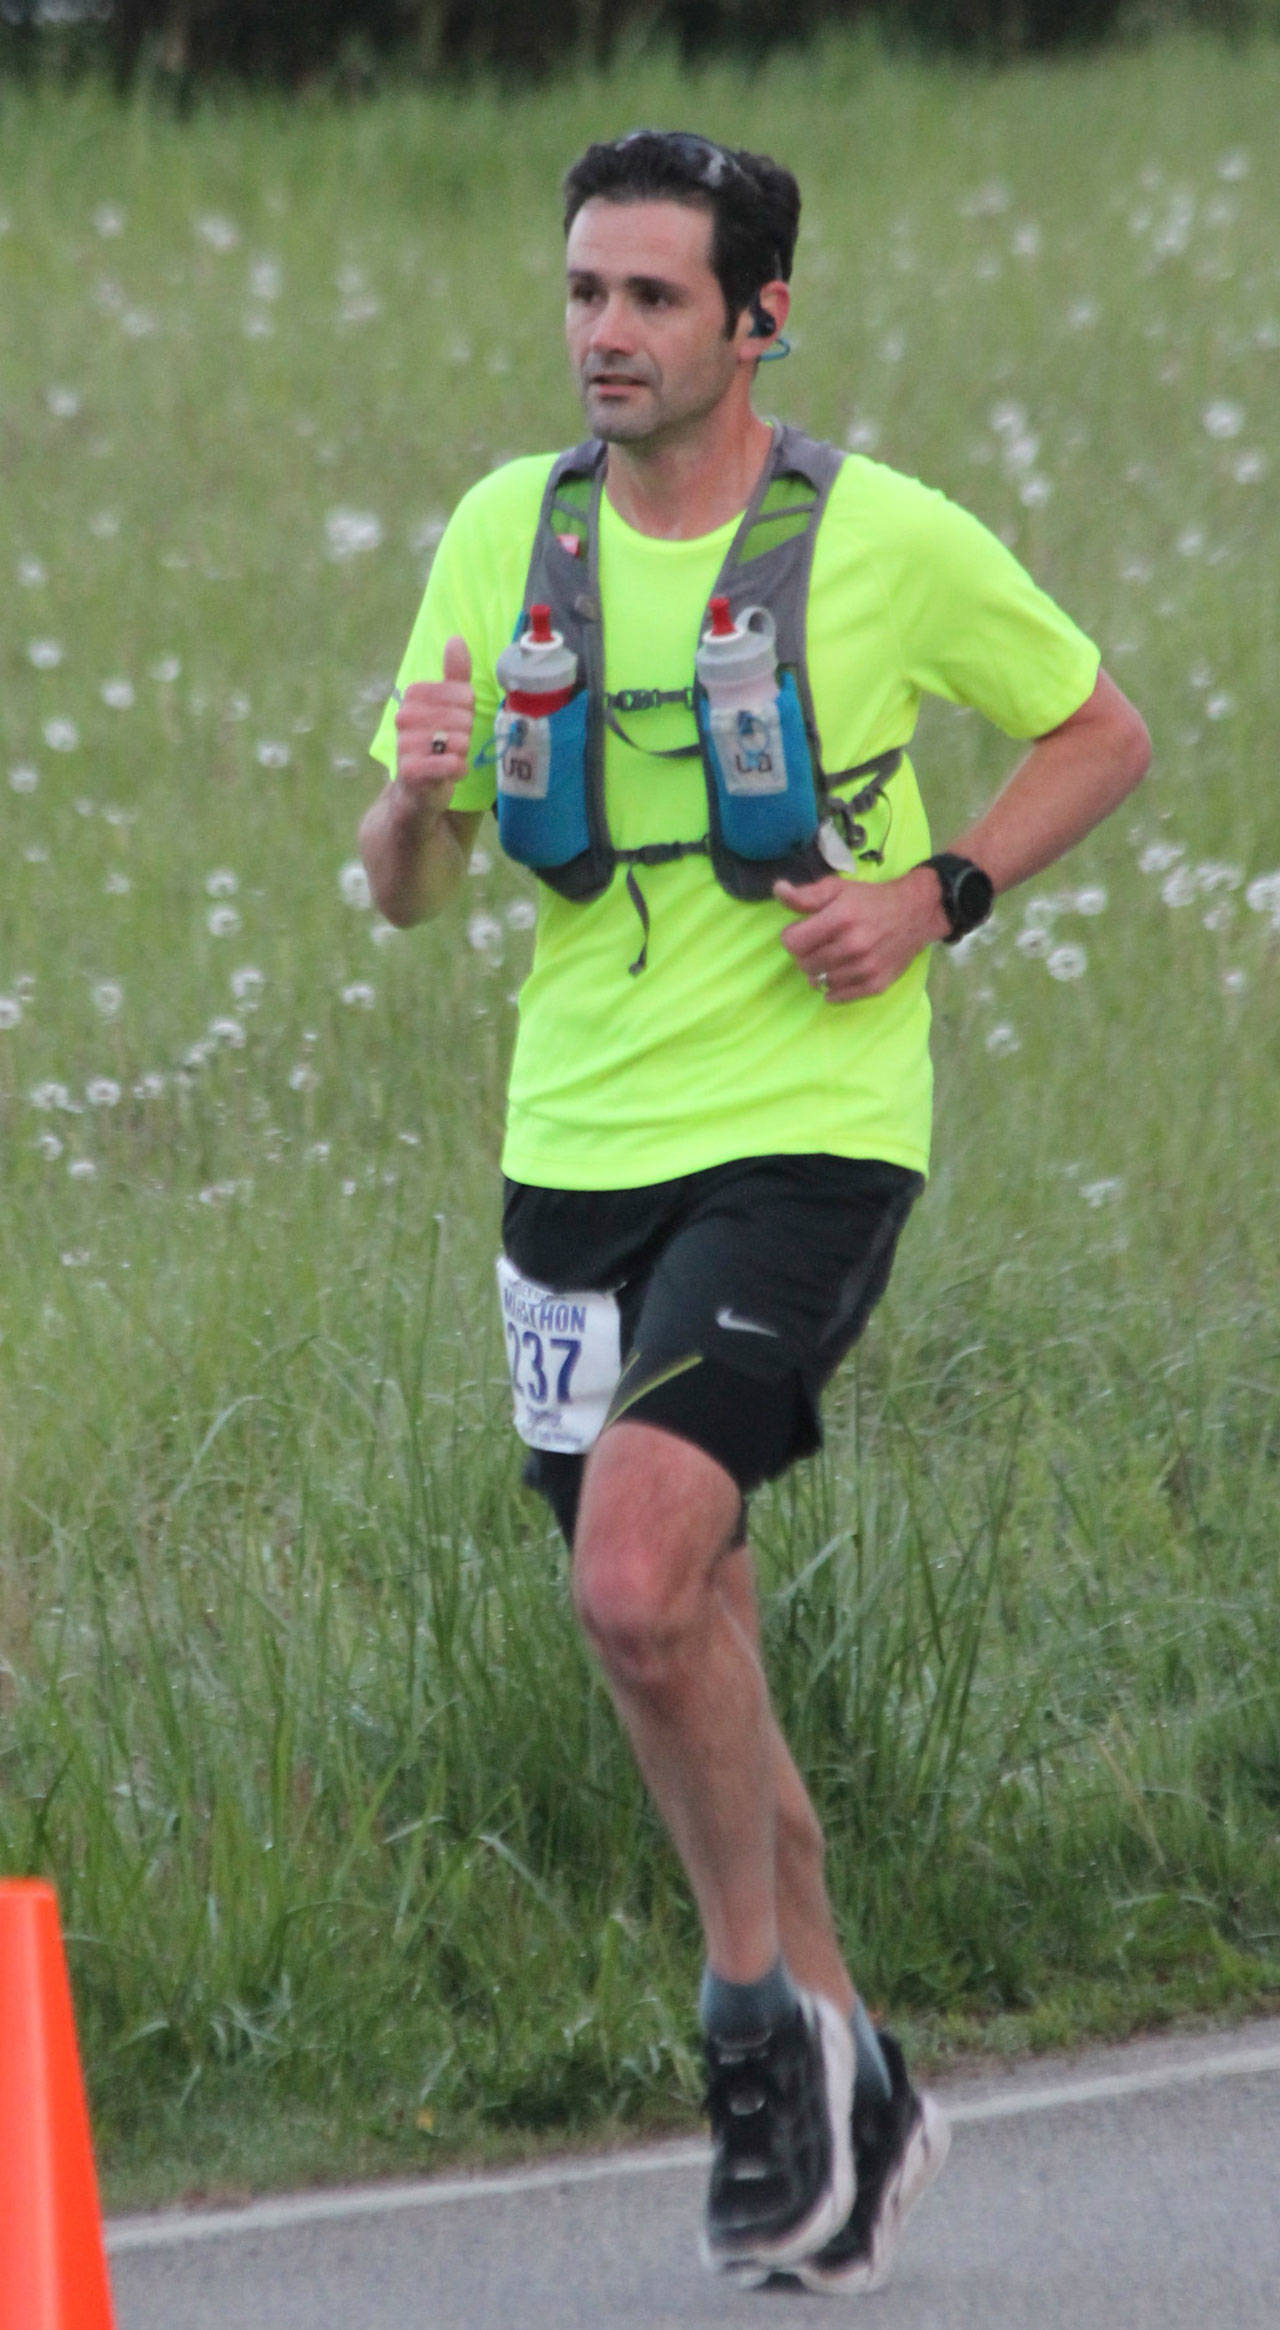 James Steller will run “around” Whidbey Island to raise money for the Community Foundation for Coupeville Public Schools. (Photo by Jim Waller/Whidbey News-Times)